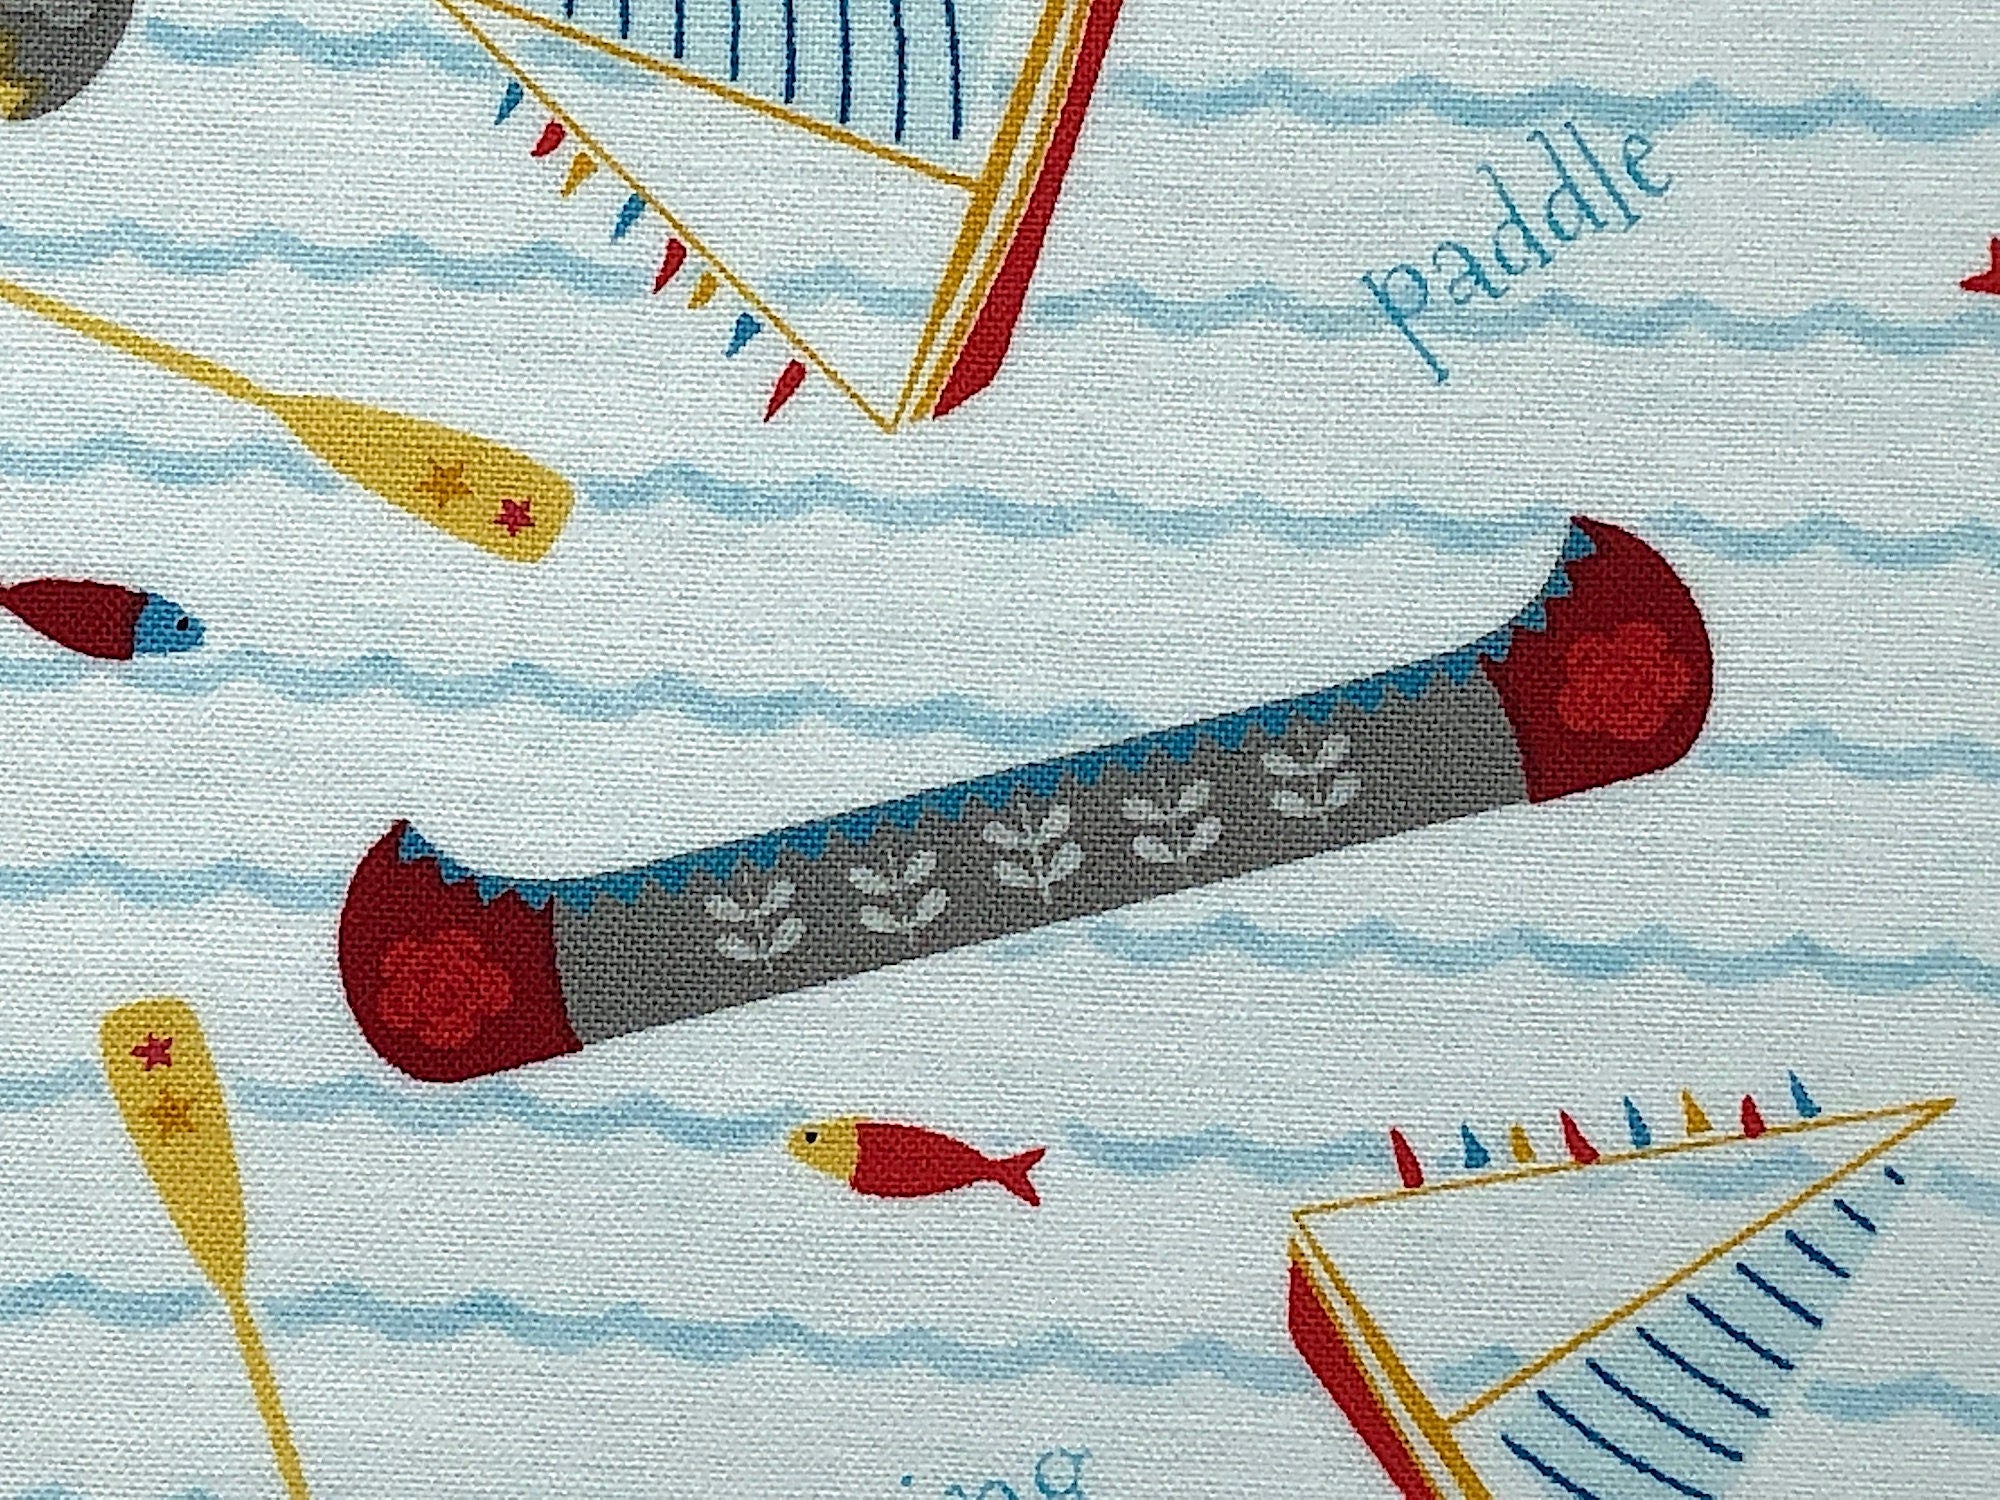 Close up of a canoe and  a fish swimming.